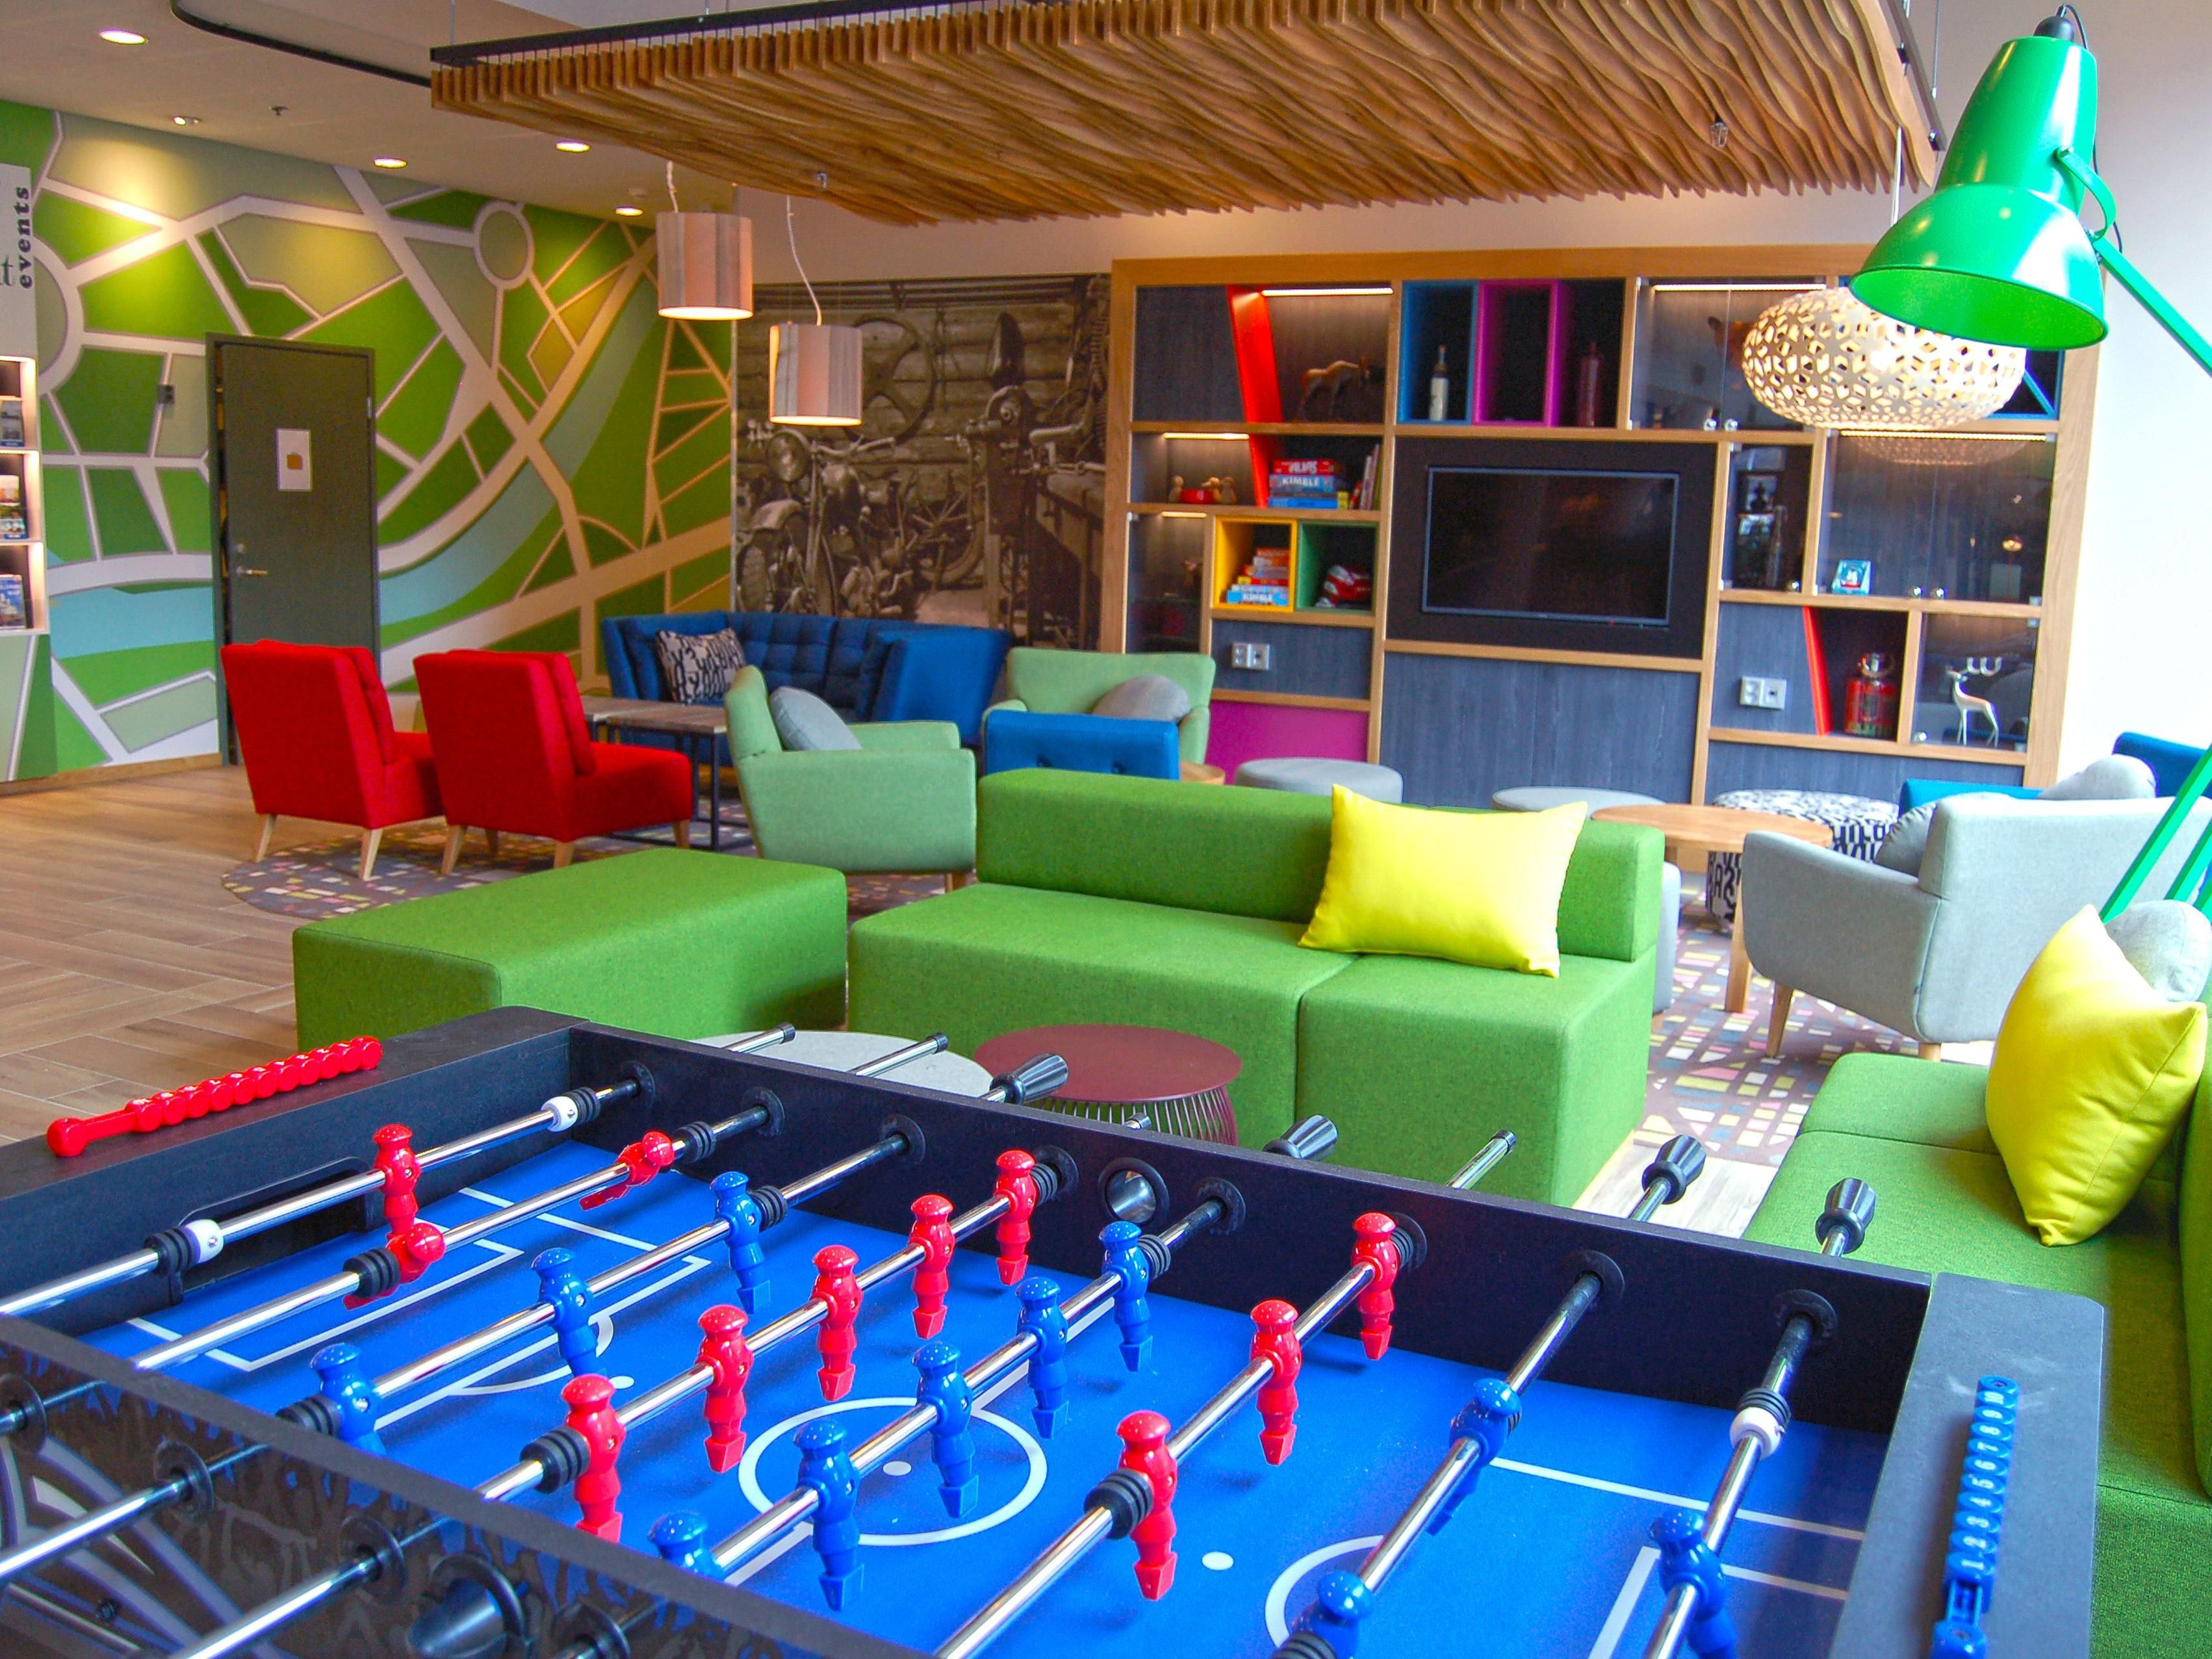 When guests want to have a bit of fun at the end of another busy day or just have a few minutes to wait before the taxi gets there, they can challenge a friend to a football game or grab a board game and chill out and connect with fellow travellers, family or friends.